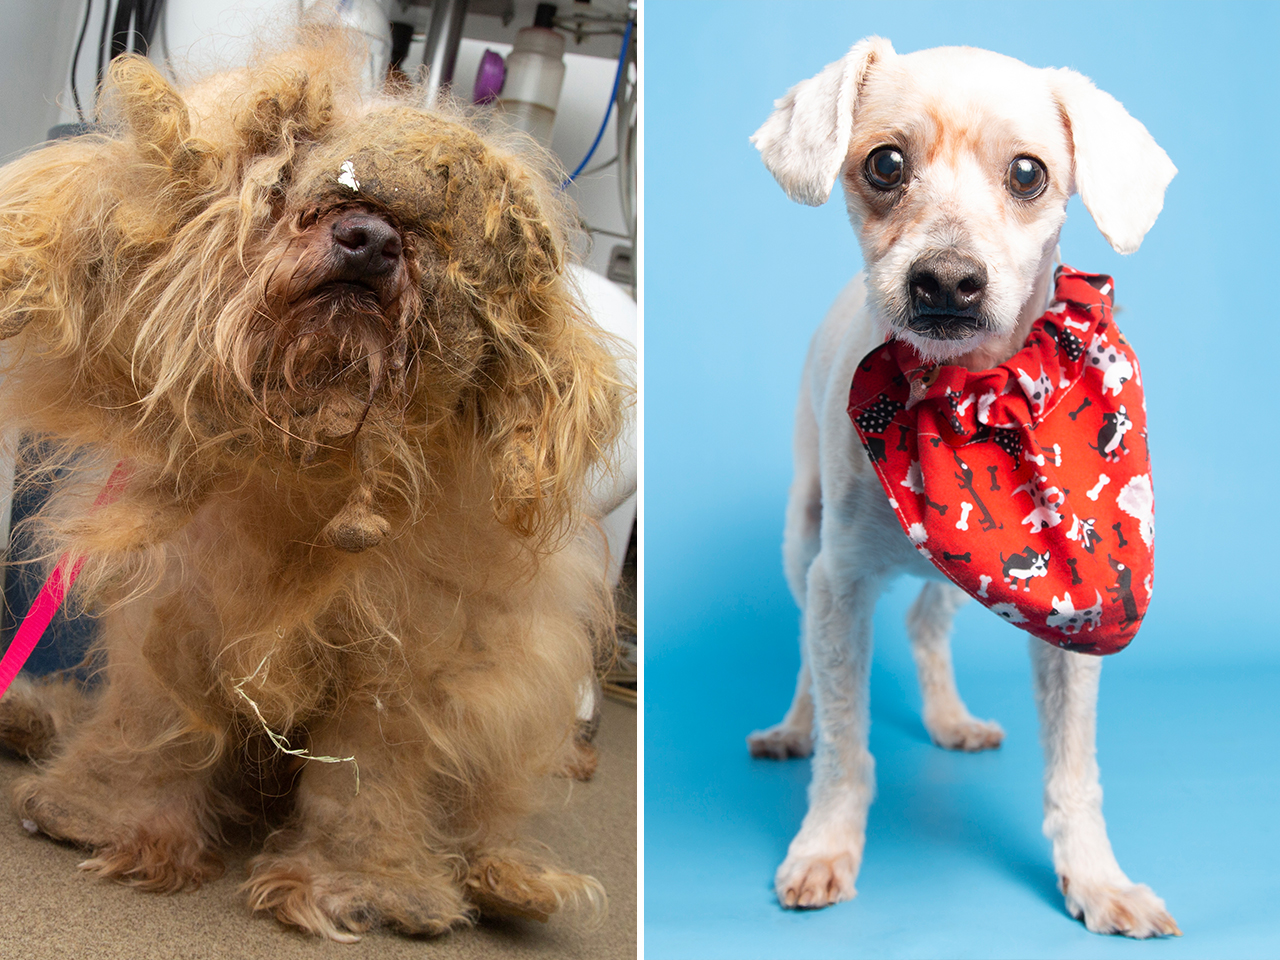 JD was found with matted fur covering his whole body, including his eyes. After a grooming he could finally see the faces of the caring staff who rescued him, but he’s still looking for a family.